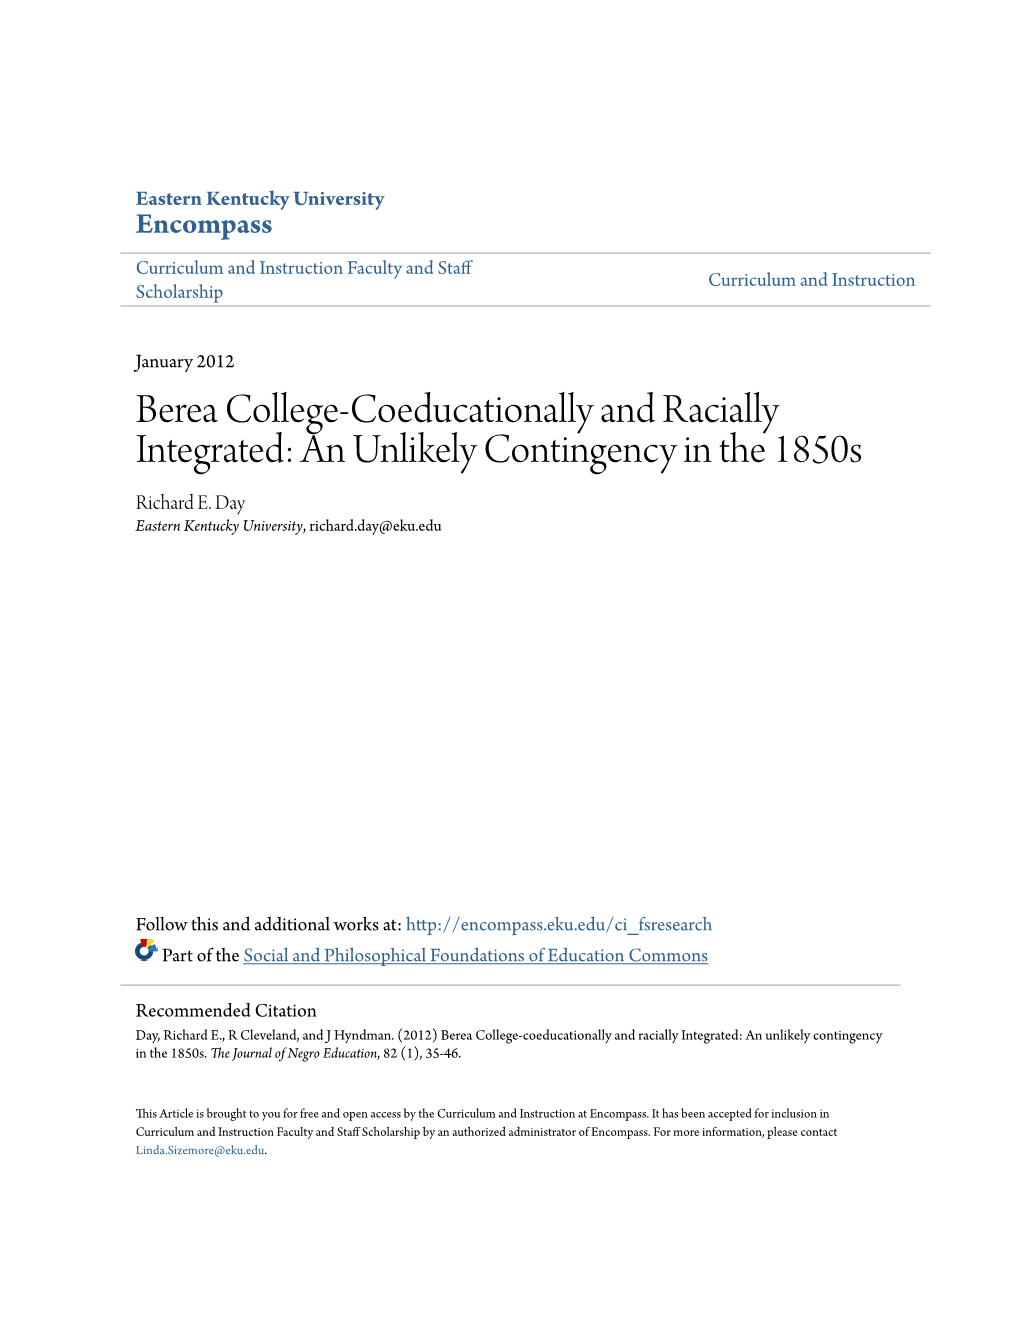 Berea College-Coeducationally and Racially Integrated: an Unlikely Contingency in the 1850S Richard E